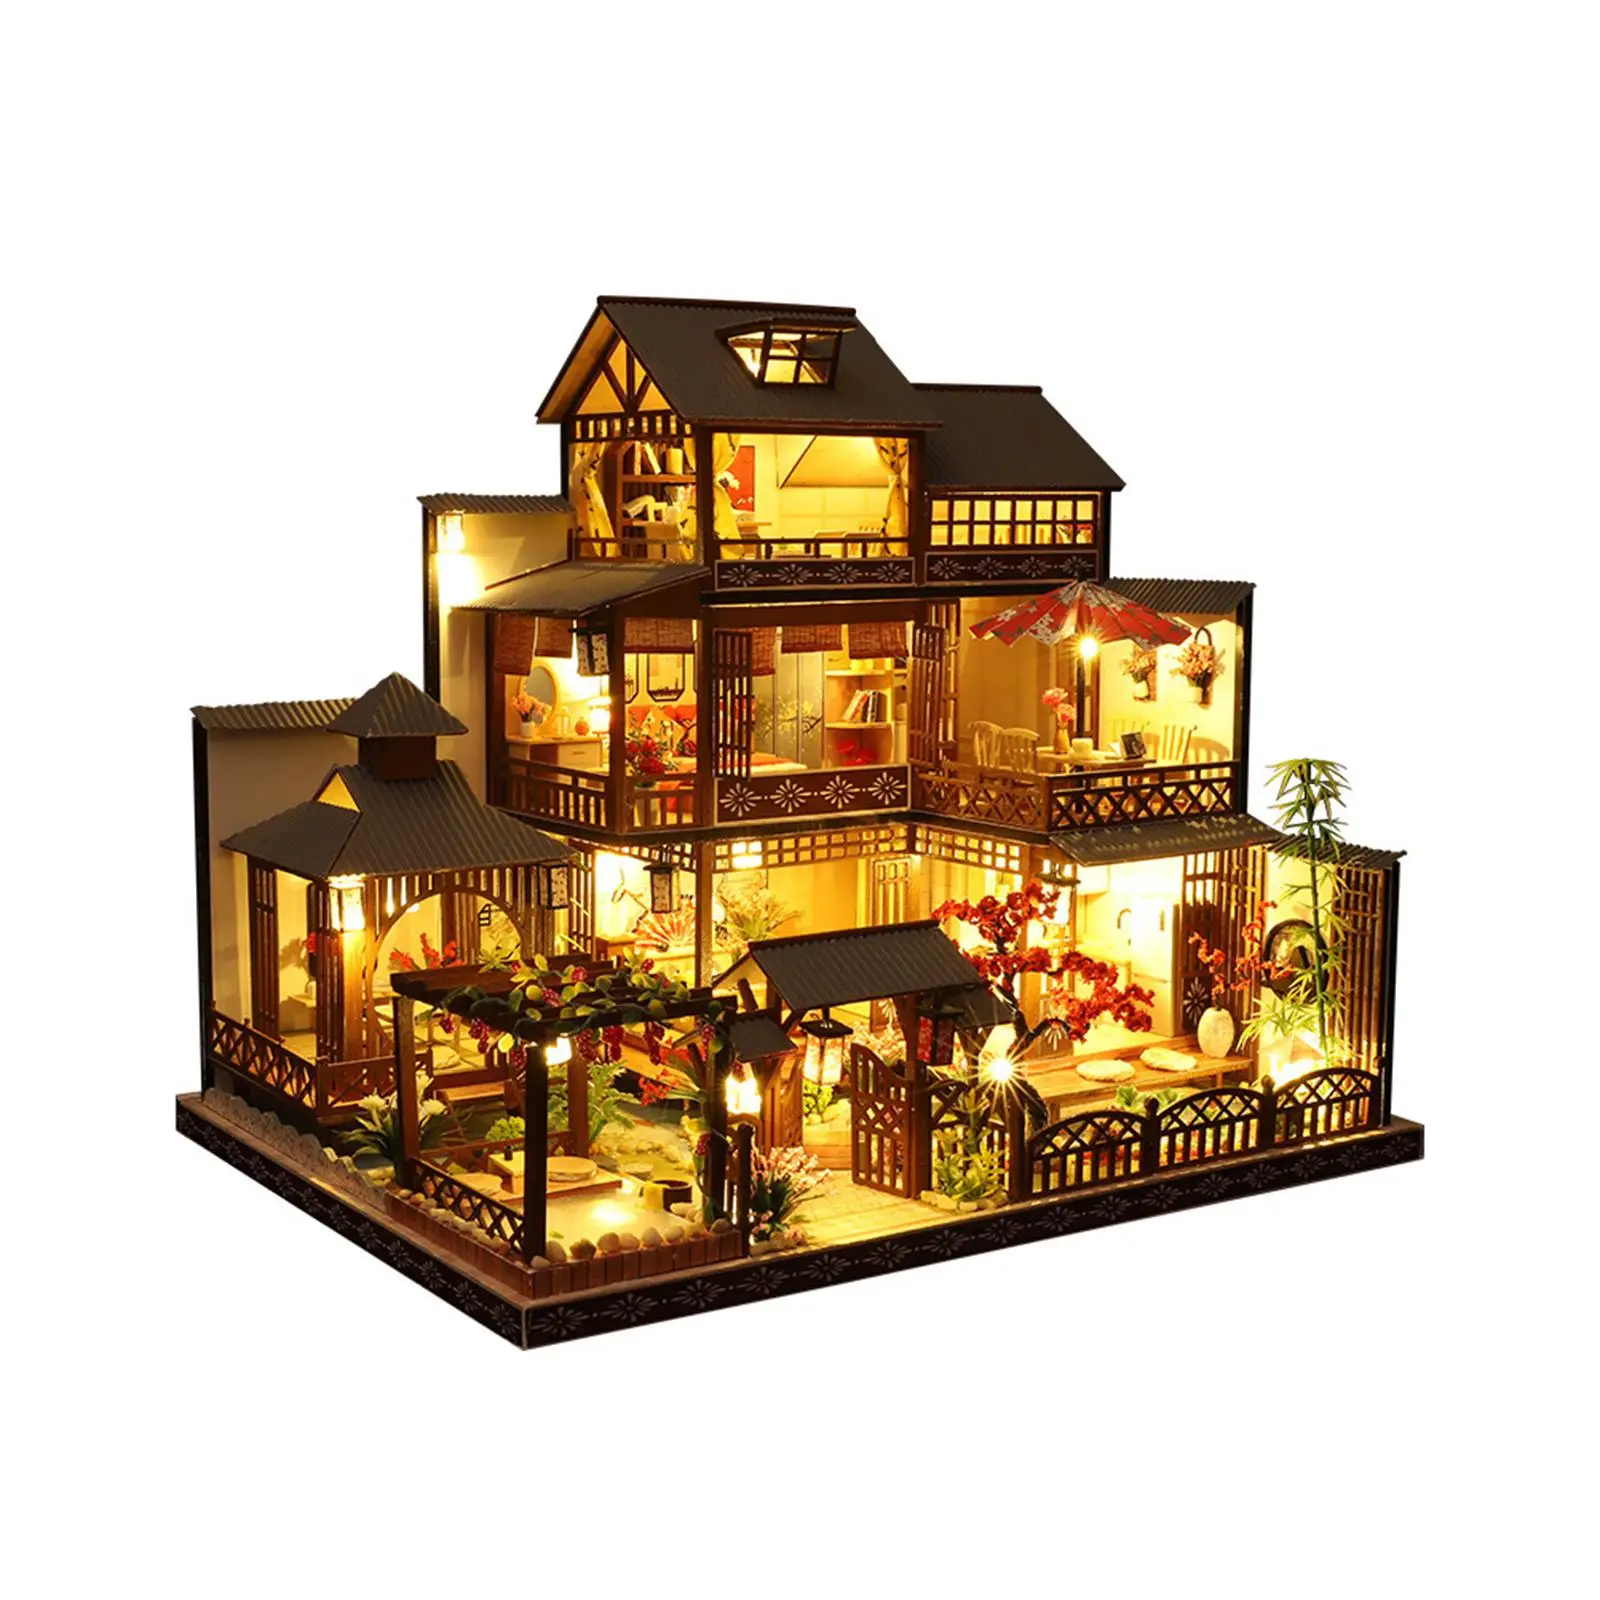 Diy Dollhouses Miniature with Wooden Furniture Handmade for Kids Teens Adults